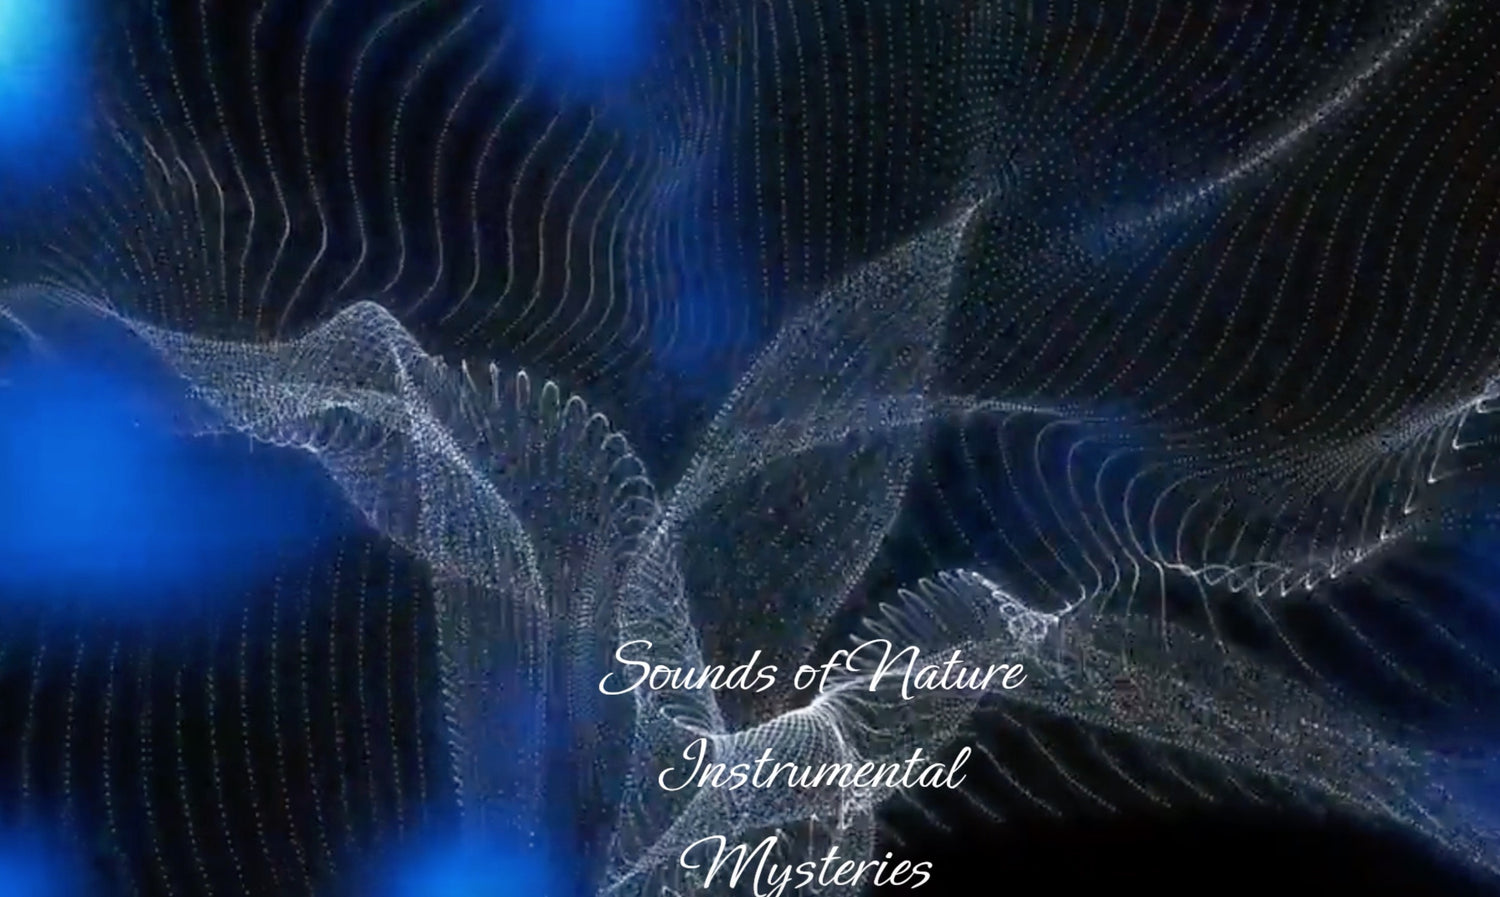 Sounds of Nature Instrumental Mysteries